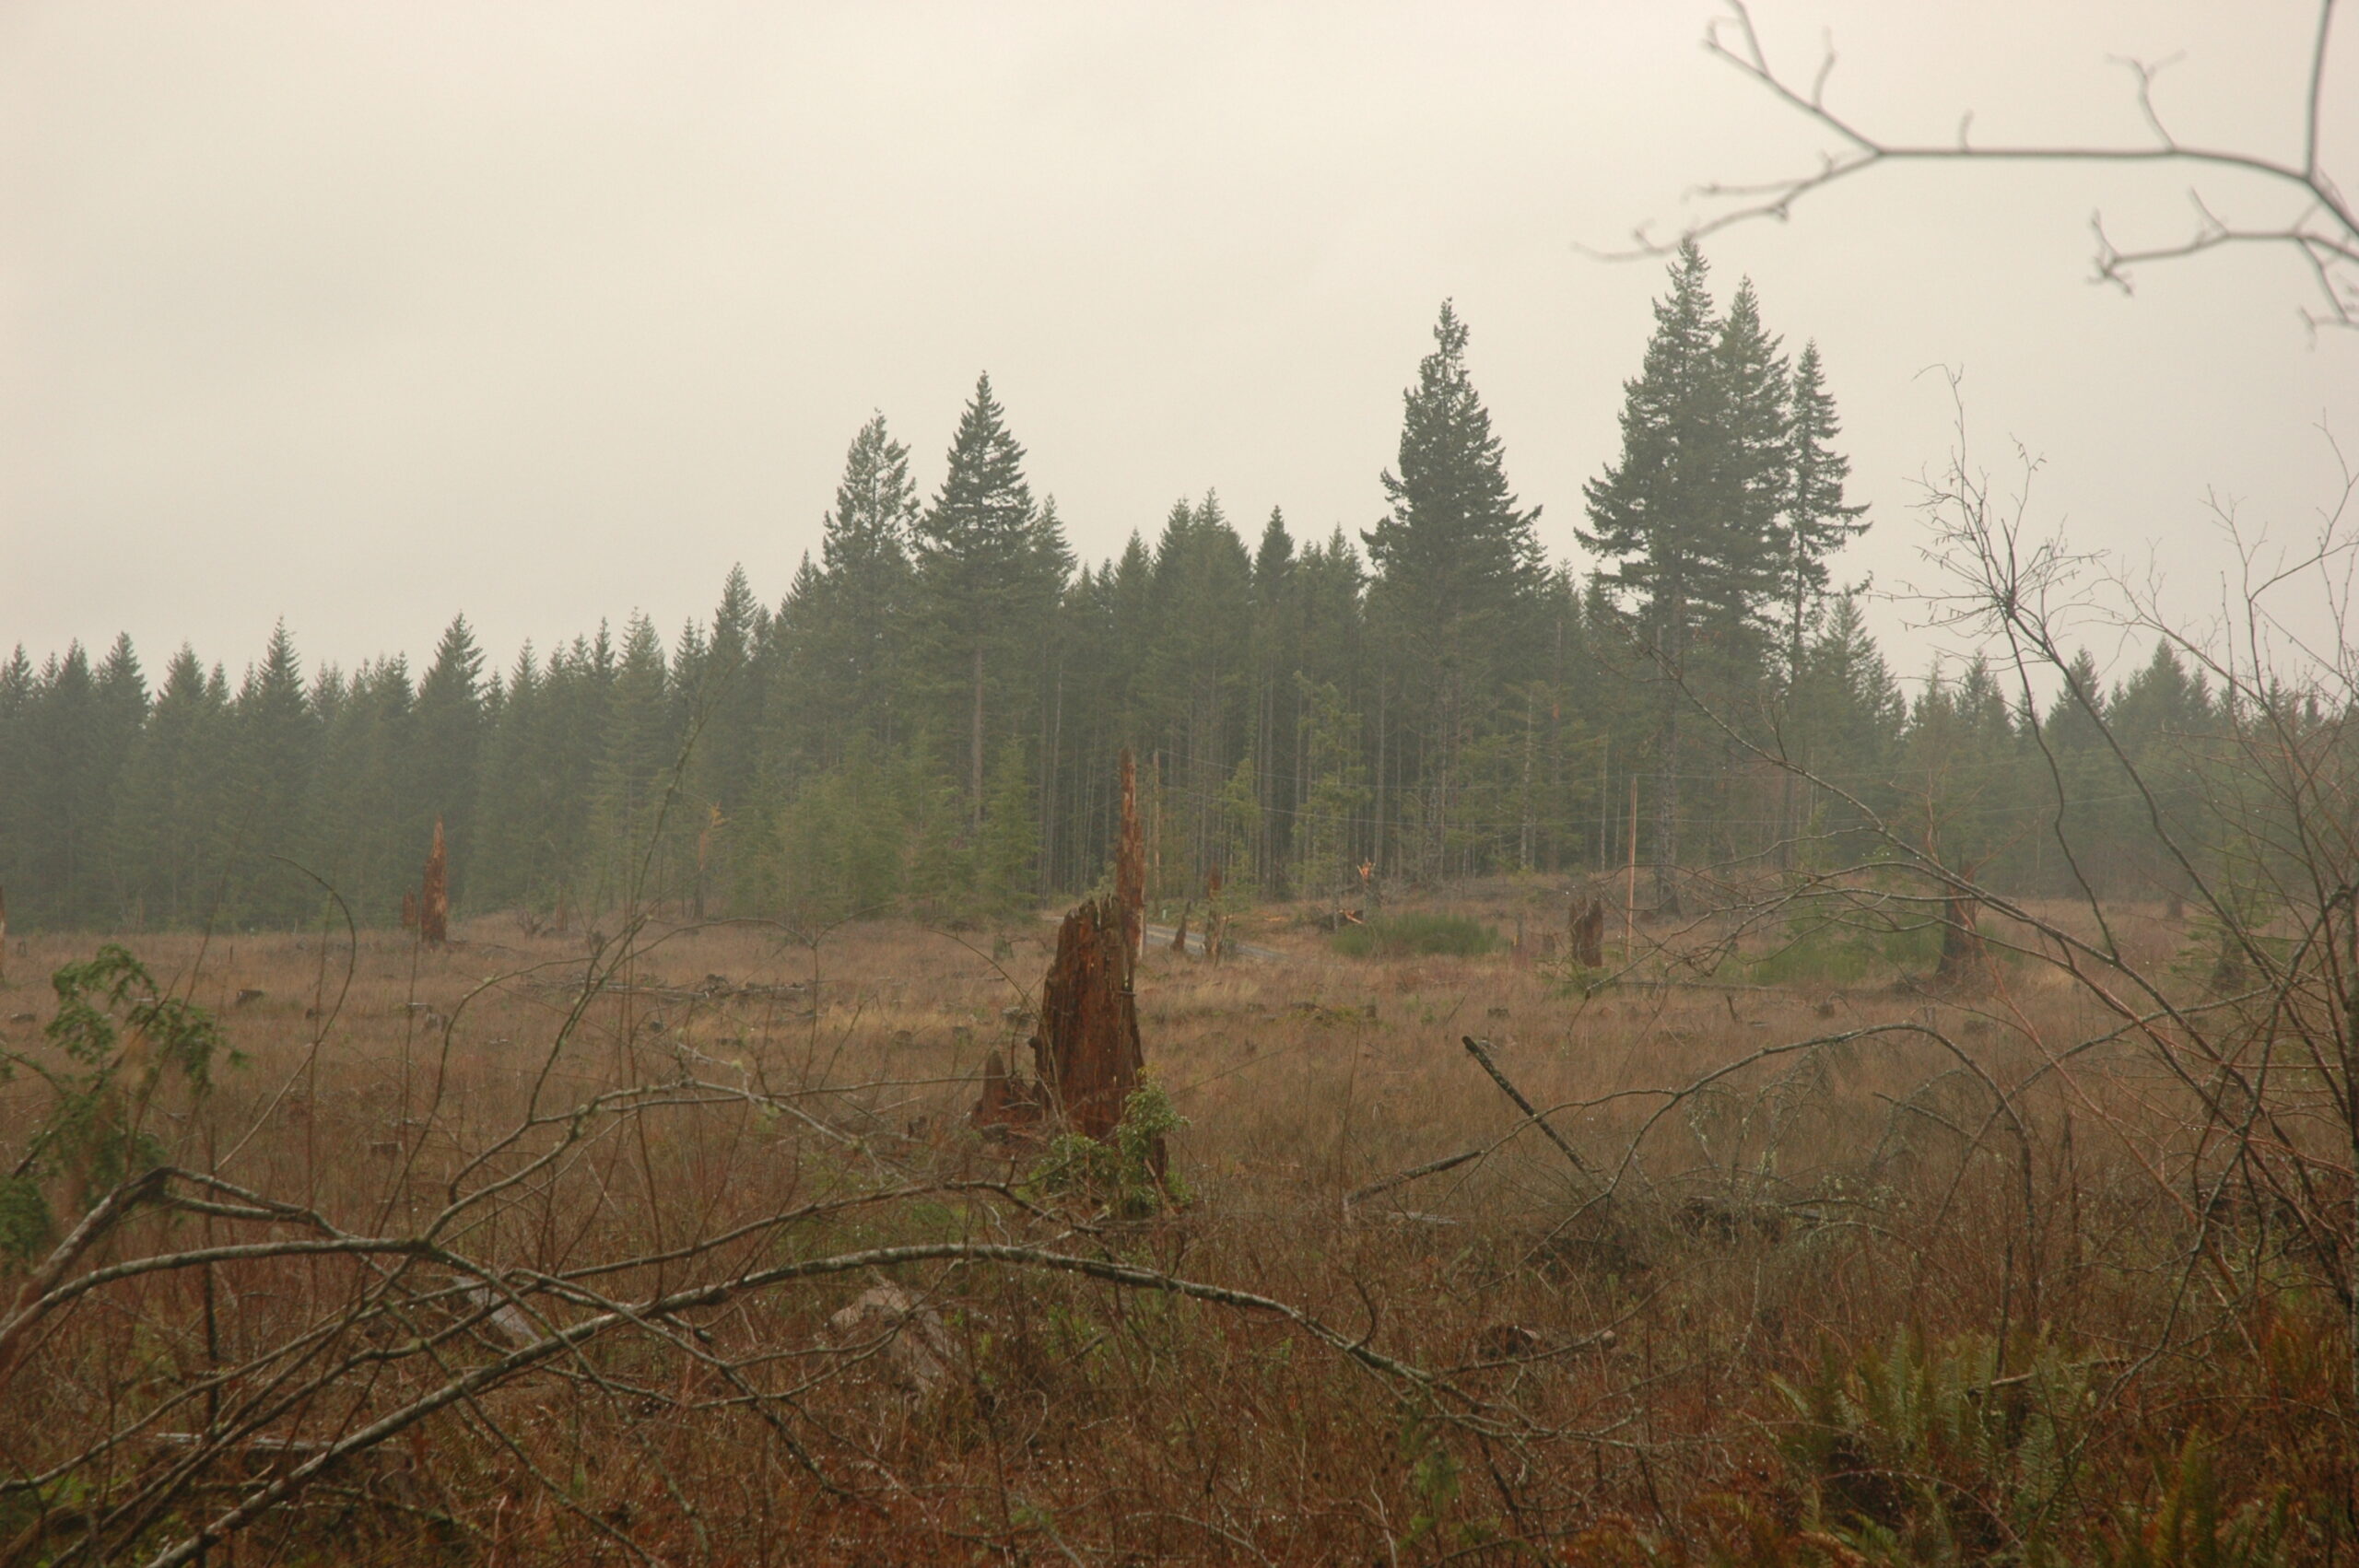 In the forefront of the photo there is a snag amongst an old clear cut. The sky is hazy as if there is a fire nearby the area. There is forest in the background.